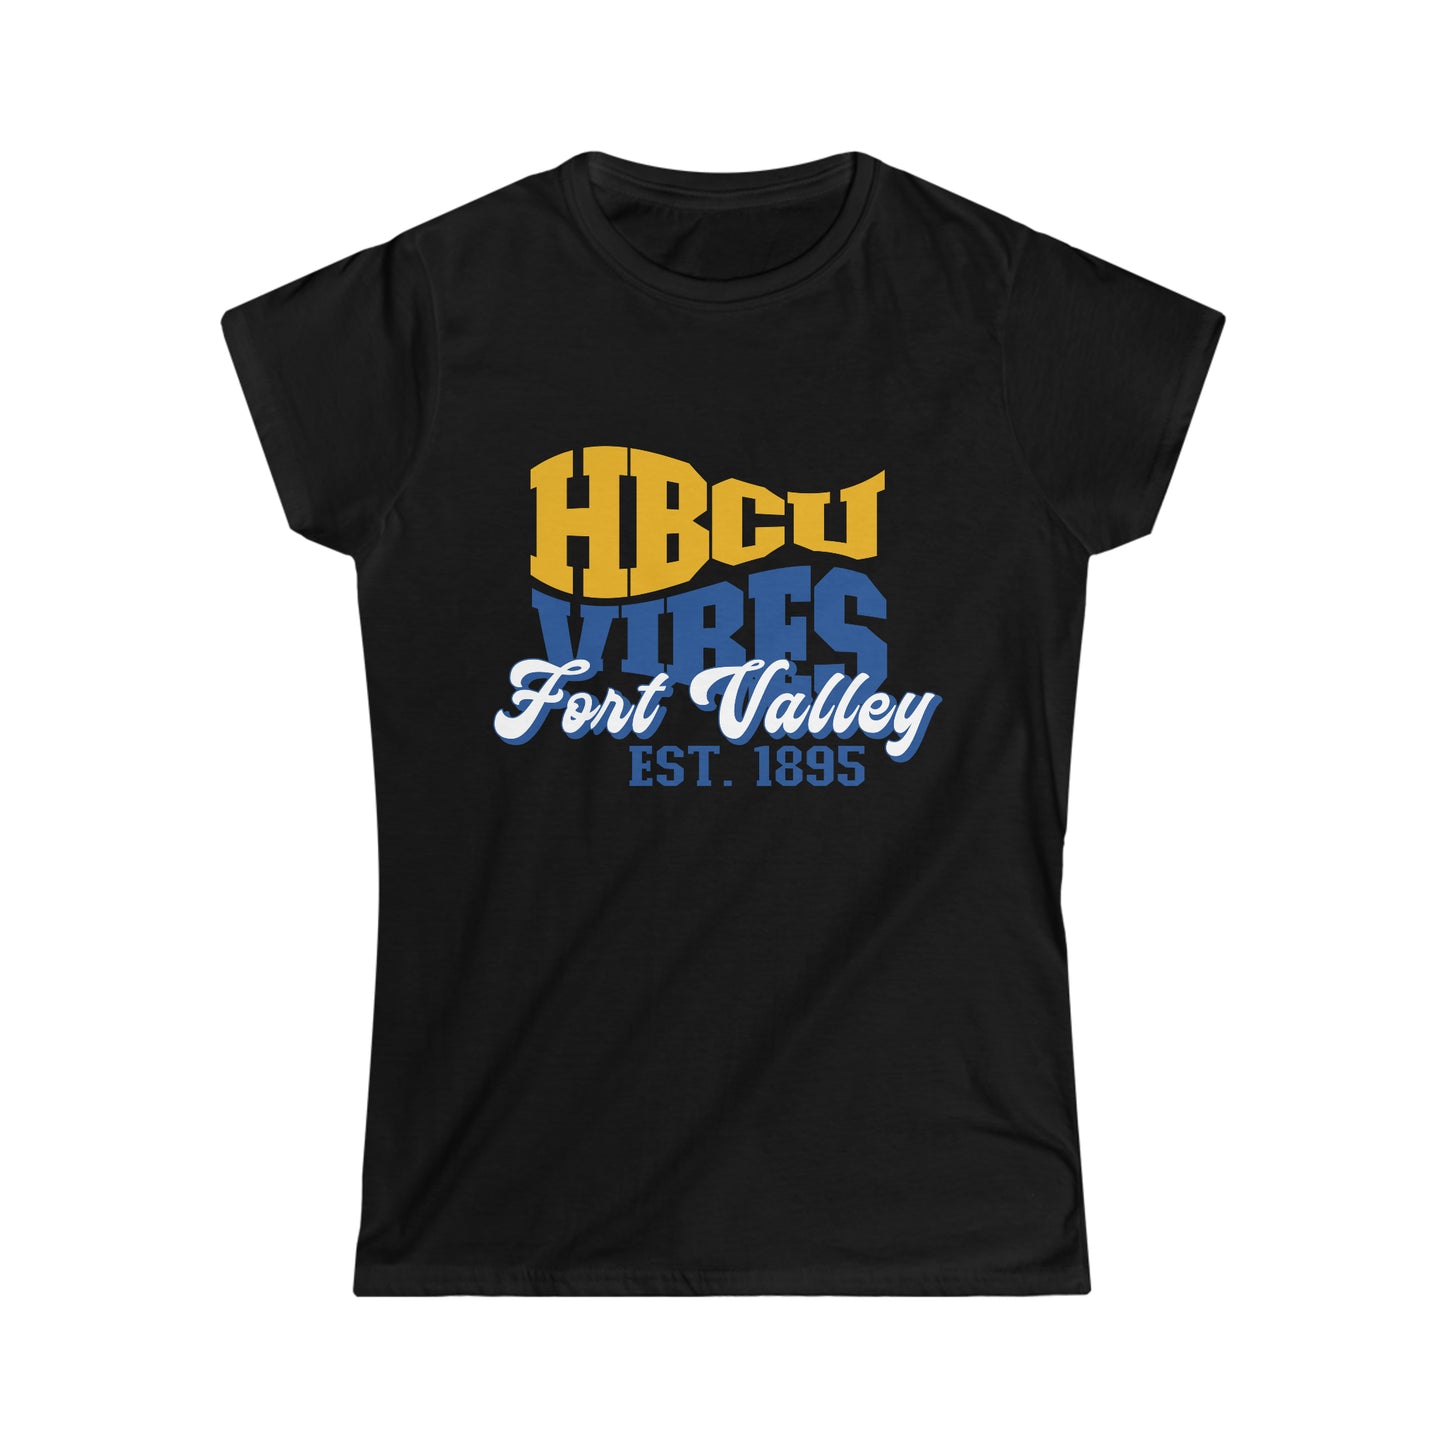 HBCU Love (Fort Valley State University HBCU Vibes/ Women's Softstyle Tee)